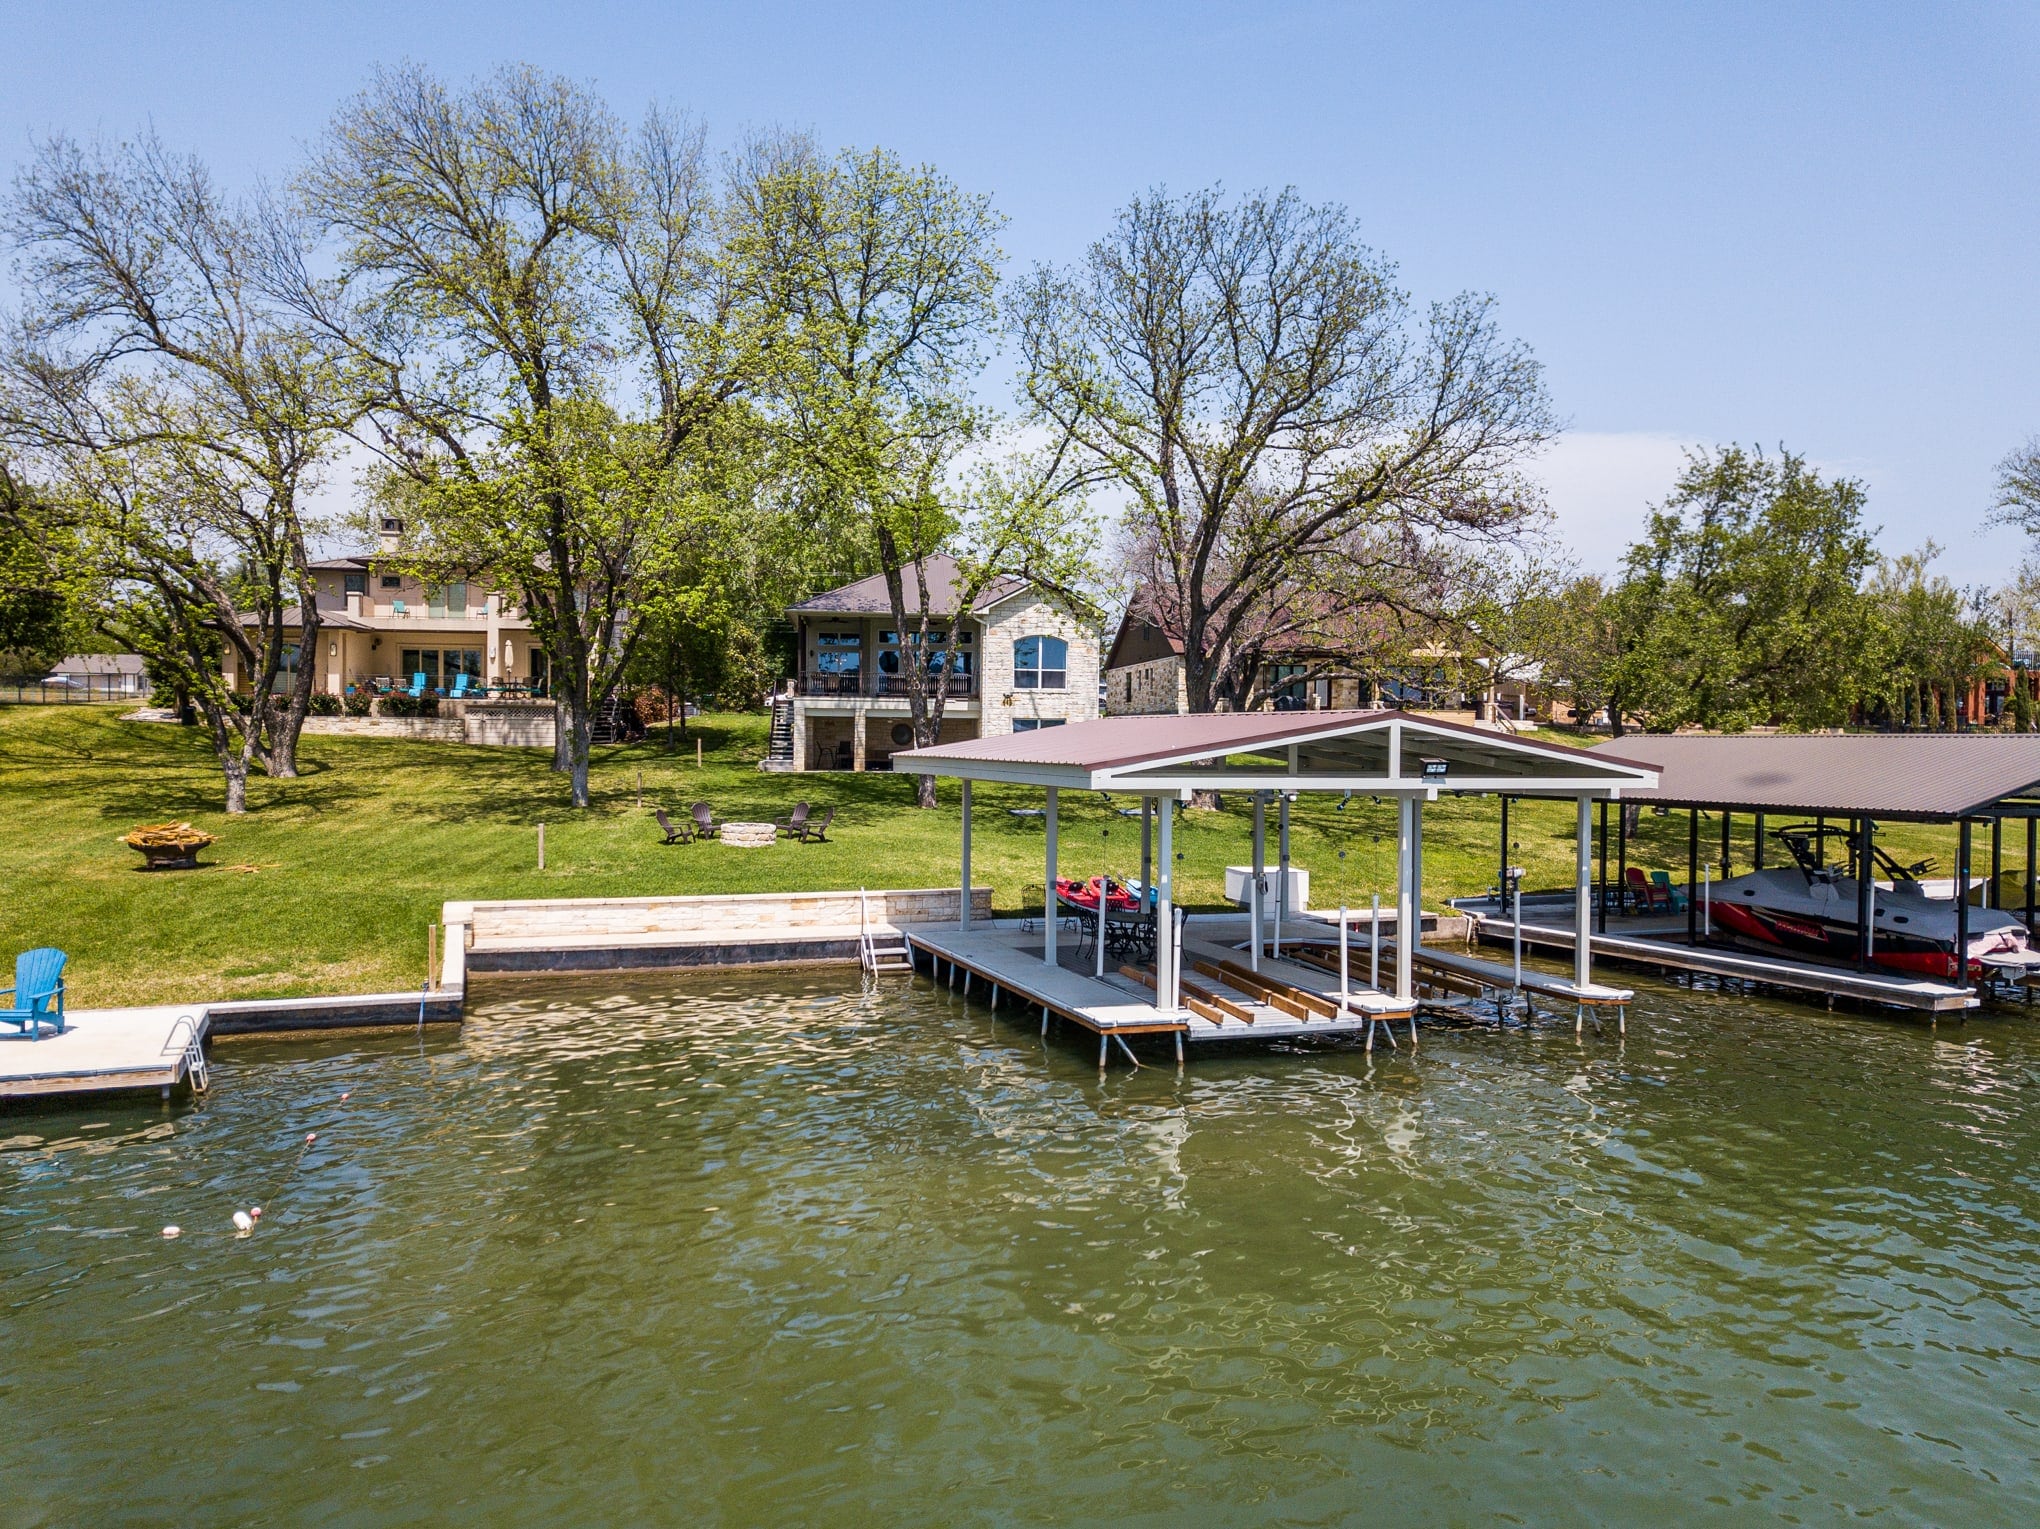 Spectacular Property with Access to Lake LBJ & Vast Backyard for Summer Entertainment